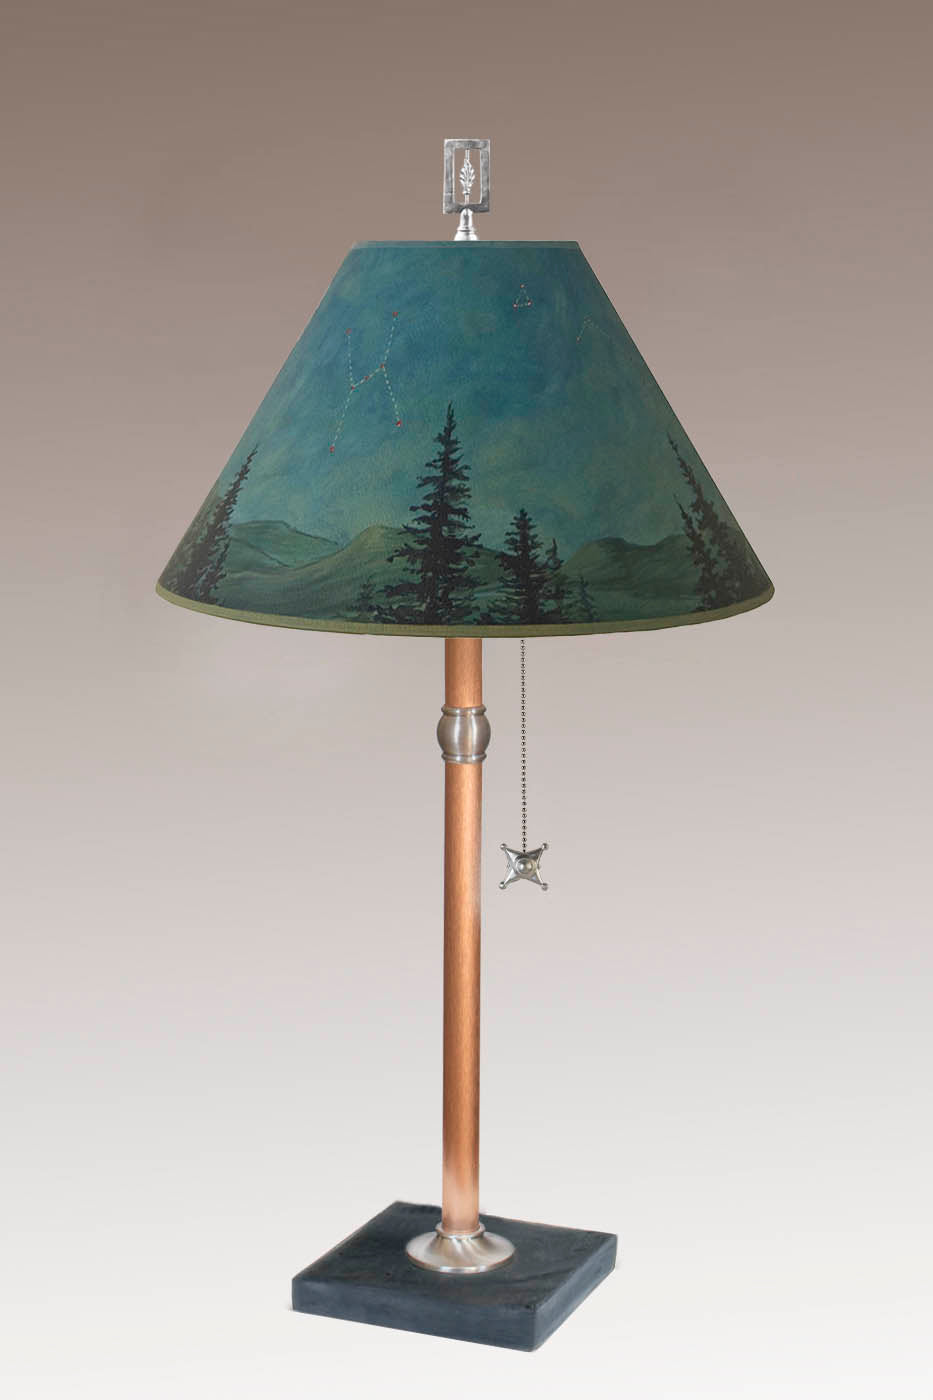 Janna Ugone &amp; Co Table Lamps Copper Table Lamp with Medium Conical Shade in Midnight Sky